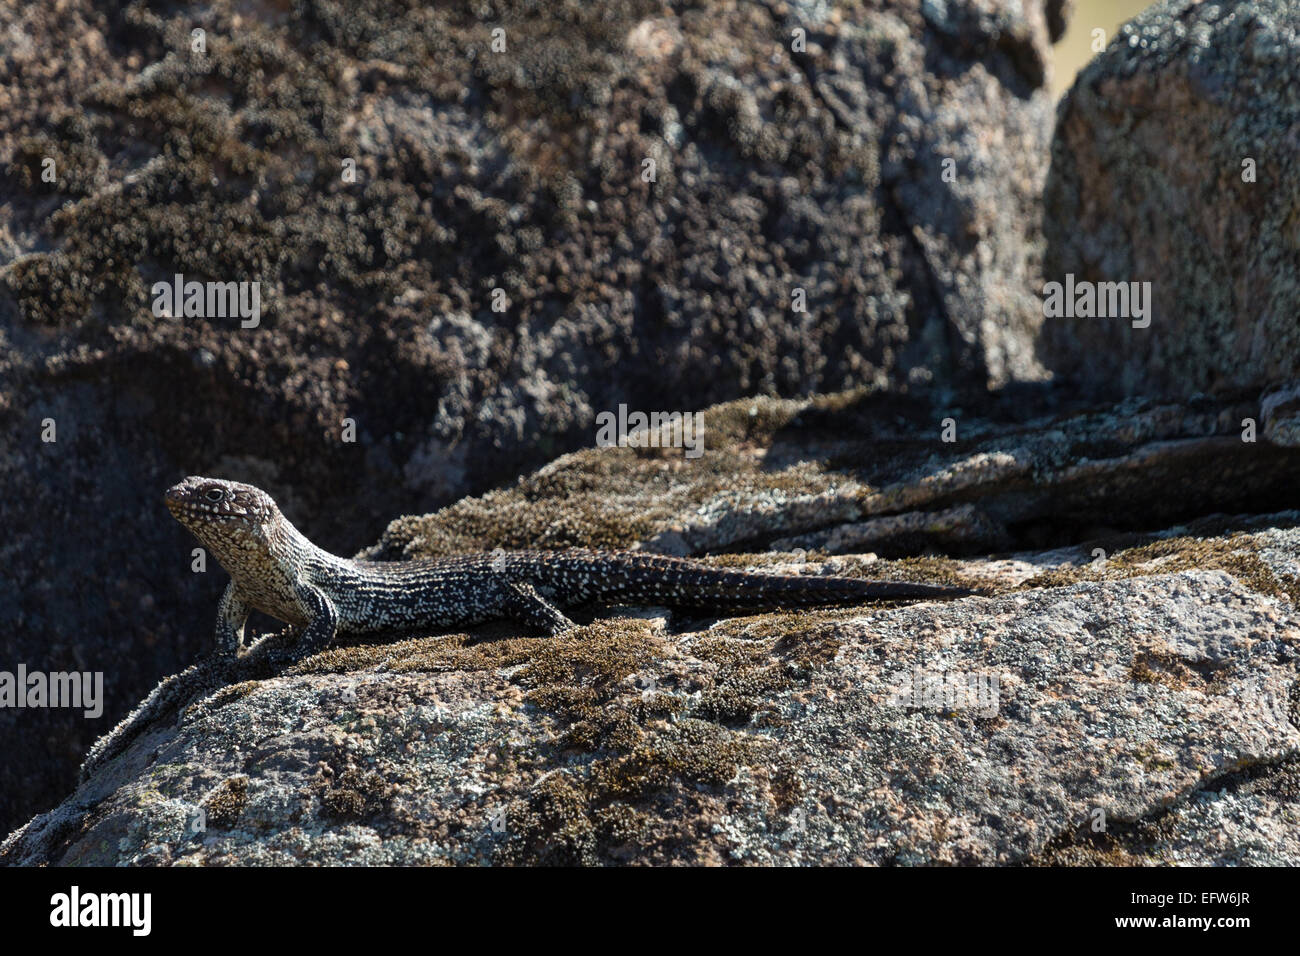 A photograph of a Cunningham's Skink on a granite boulder in central western NSW, Australia. Stock Photo